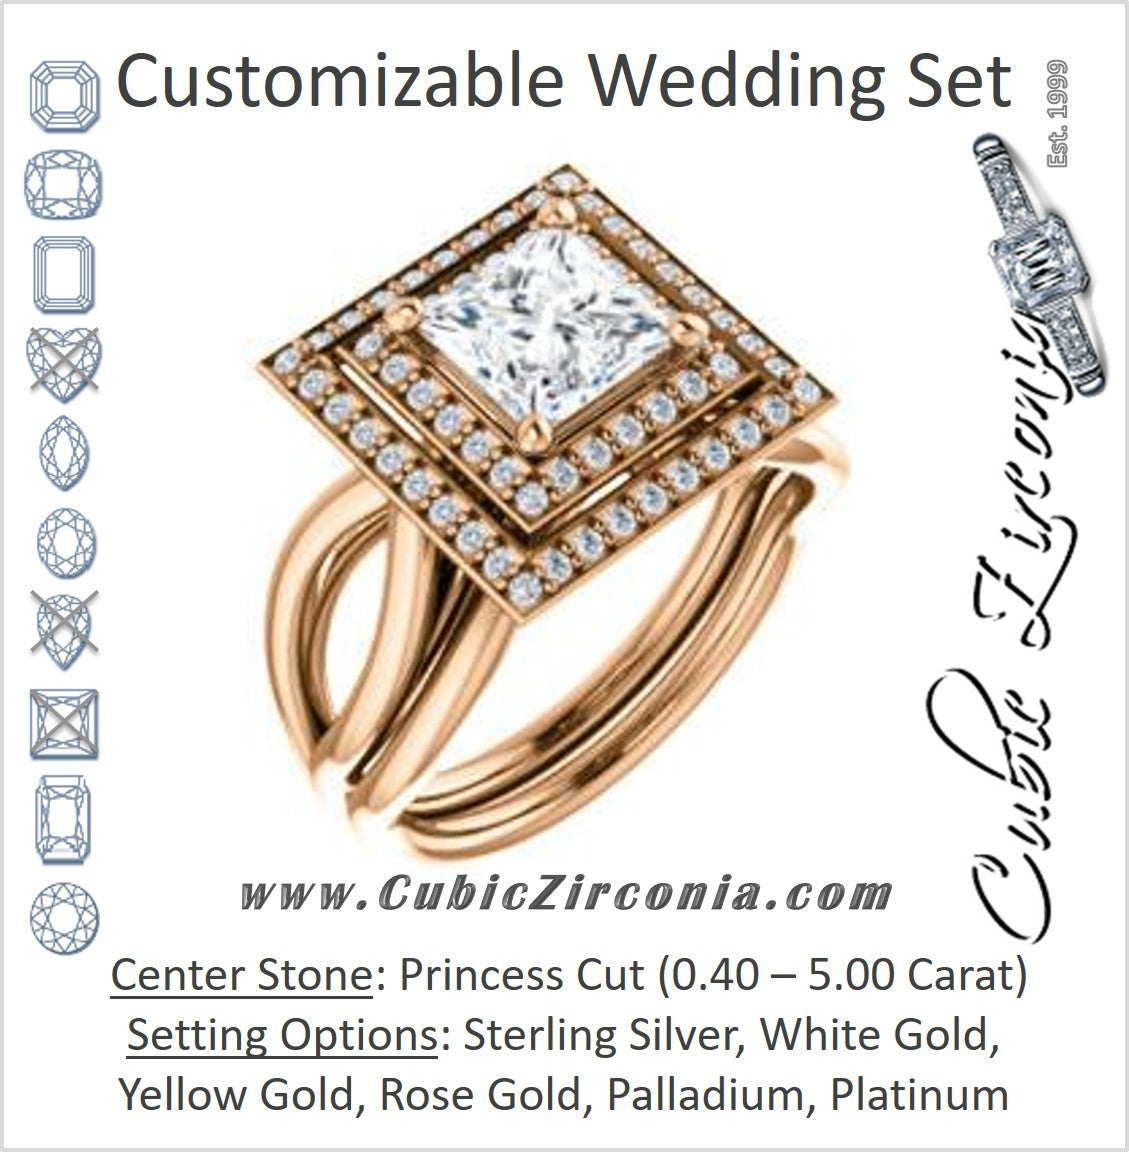 CZ Wedding Set, featuring The Magda Lesli engagement ring (Customizable Double-Halo Style Princess Cut with Curving Split Band)